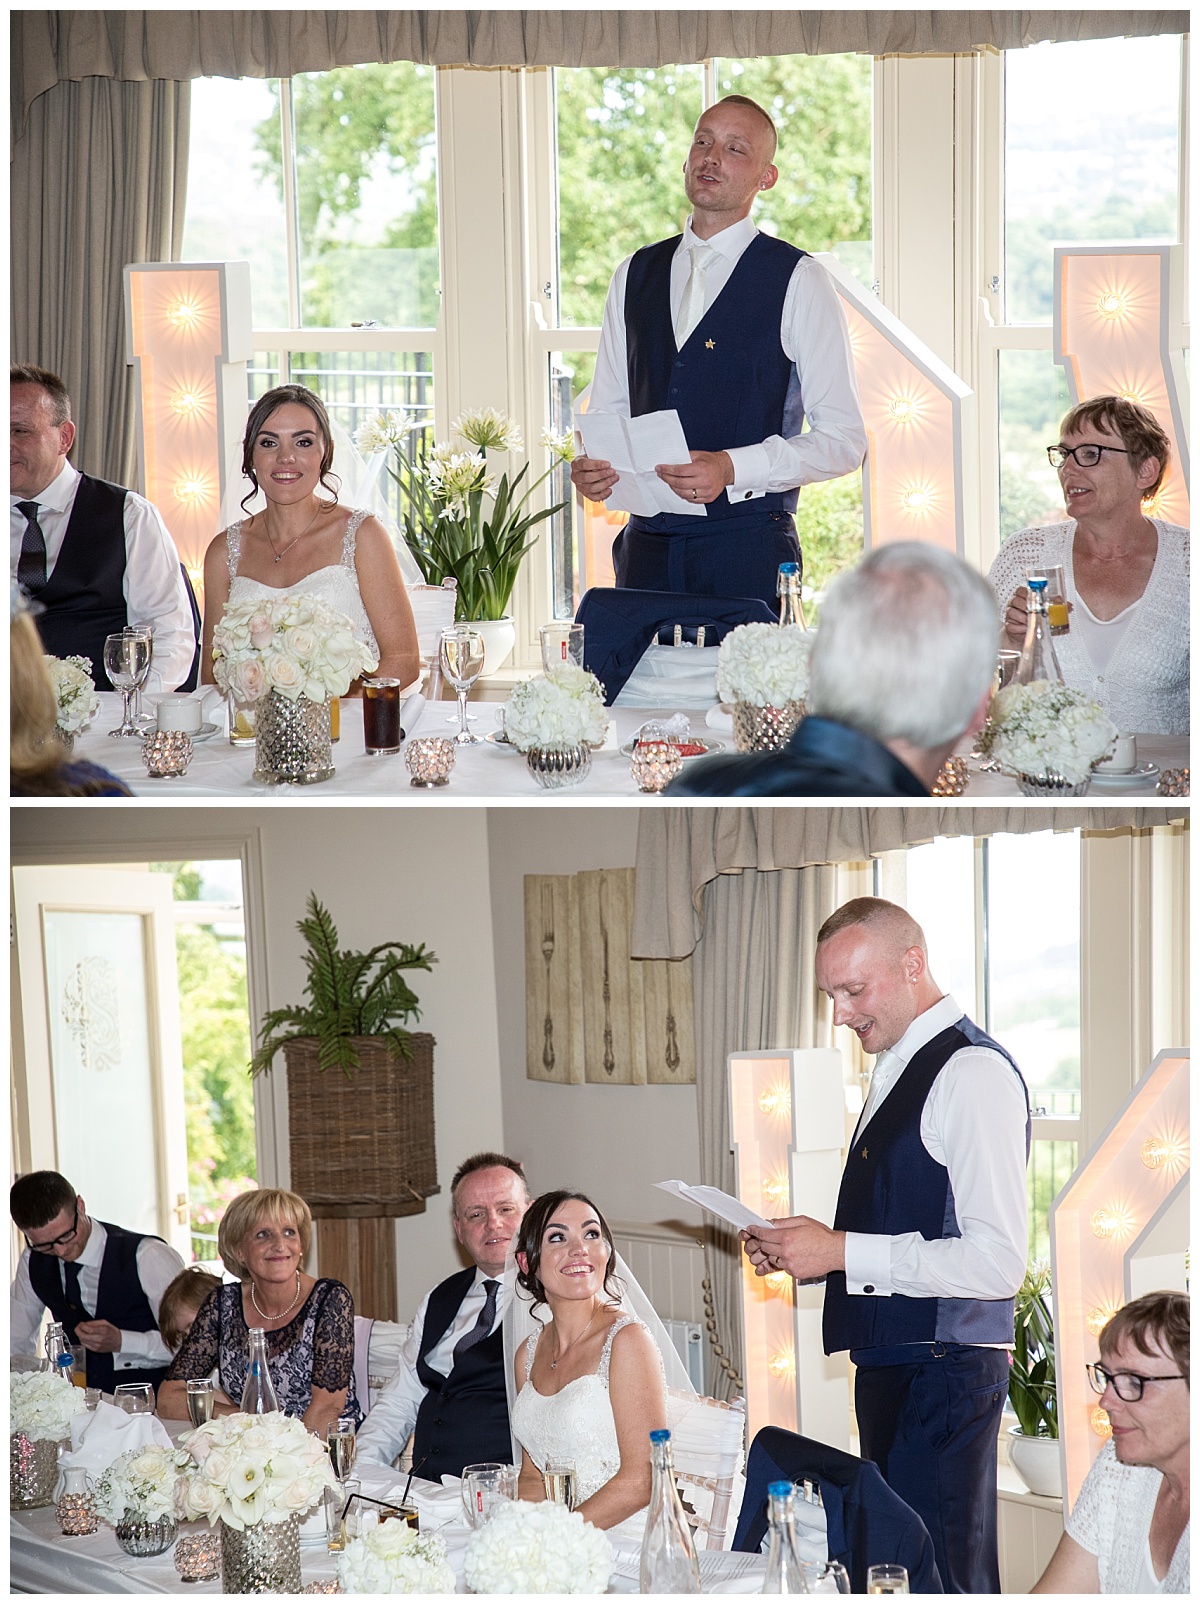 Wedding Photography Manchester - Victoria and Phillips Shireburn Arms wedding 72